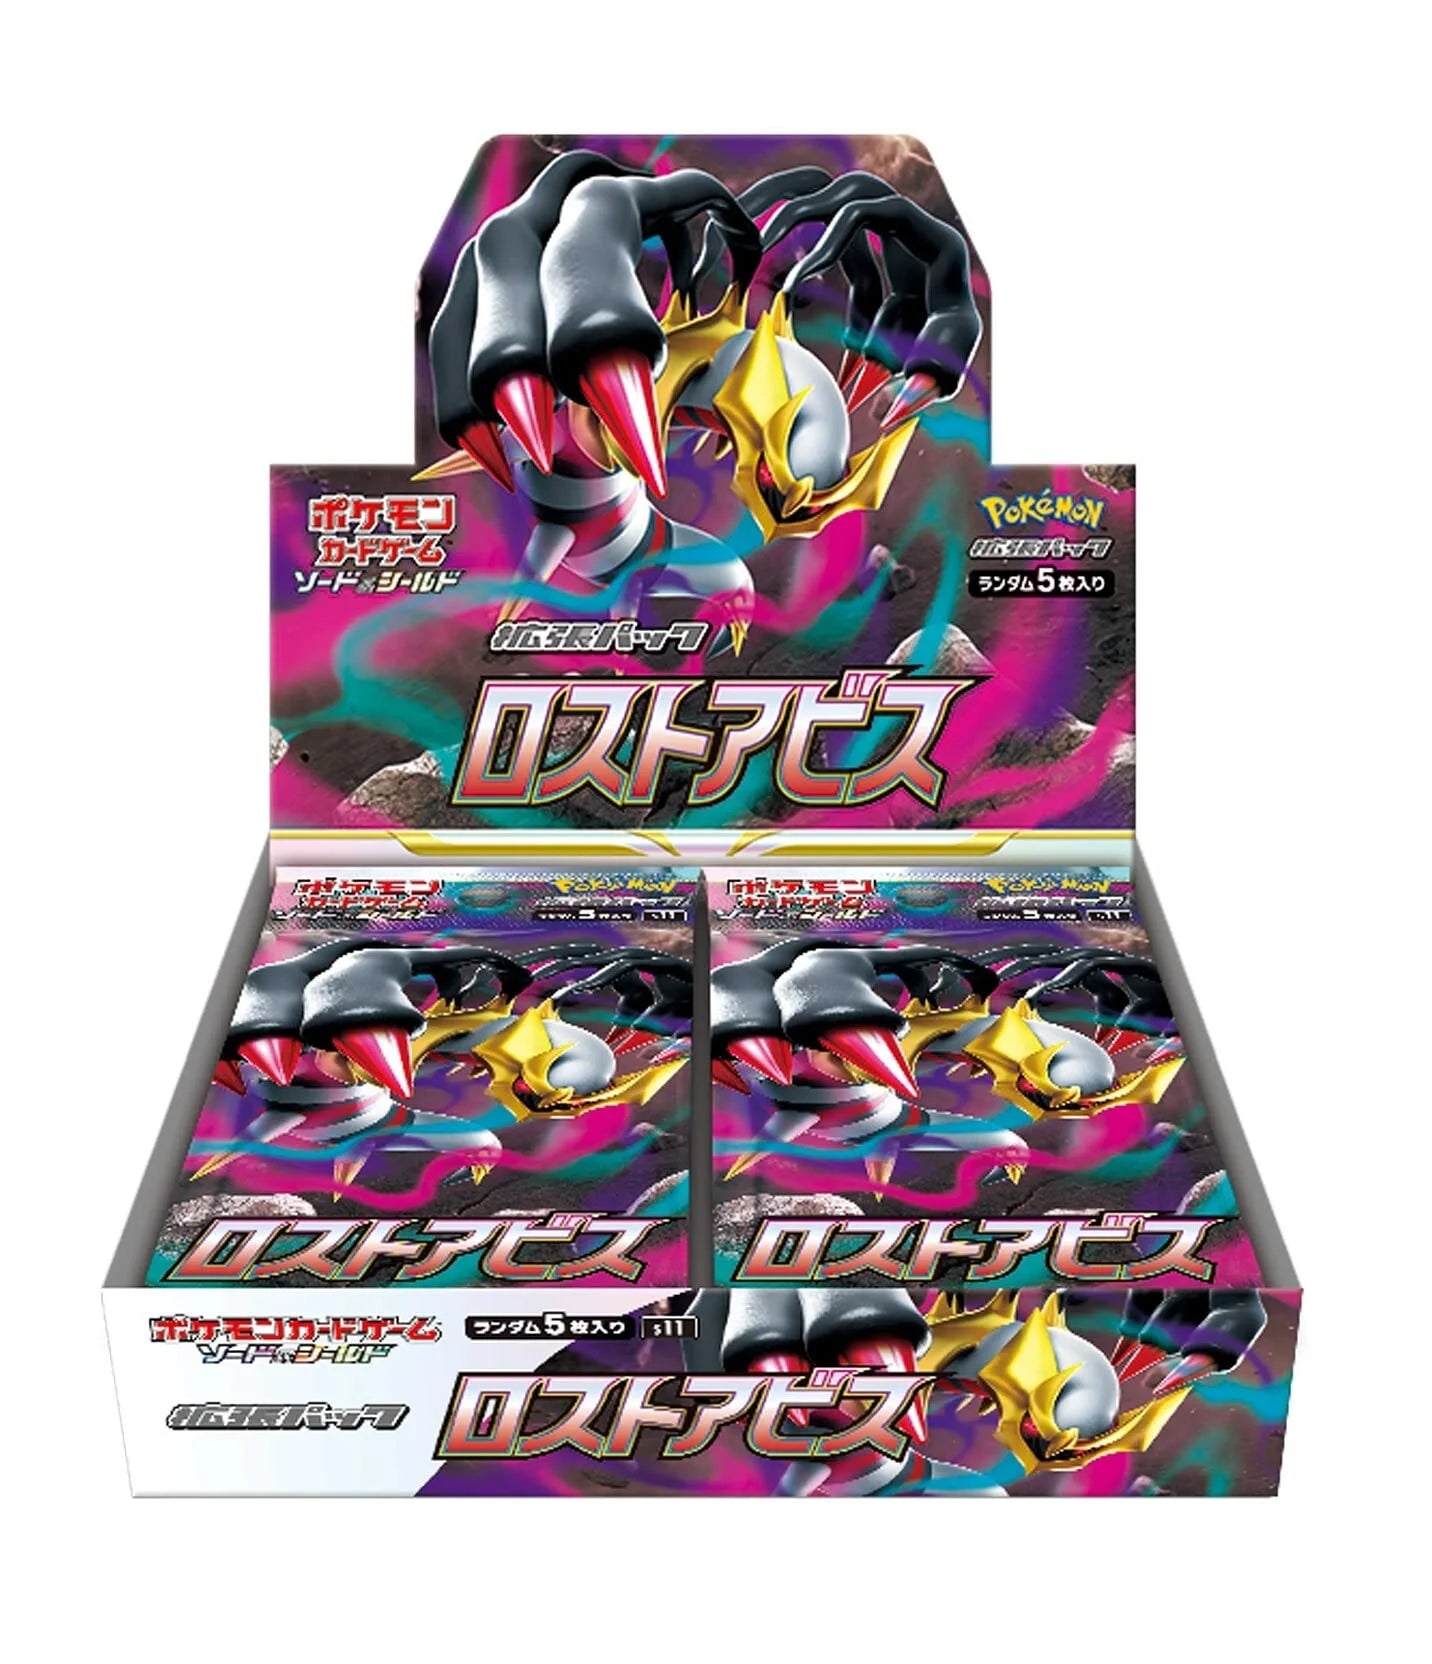 Japanese Pokémon - s11 - Lost Abyss (Lost Origin): Sword & Shield 11 Booster Packs & Boxes